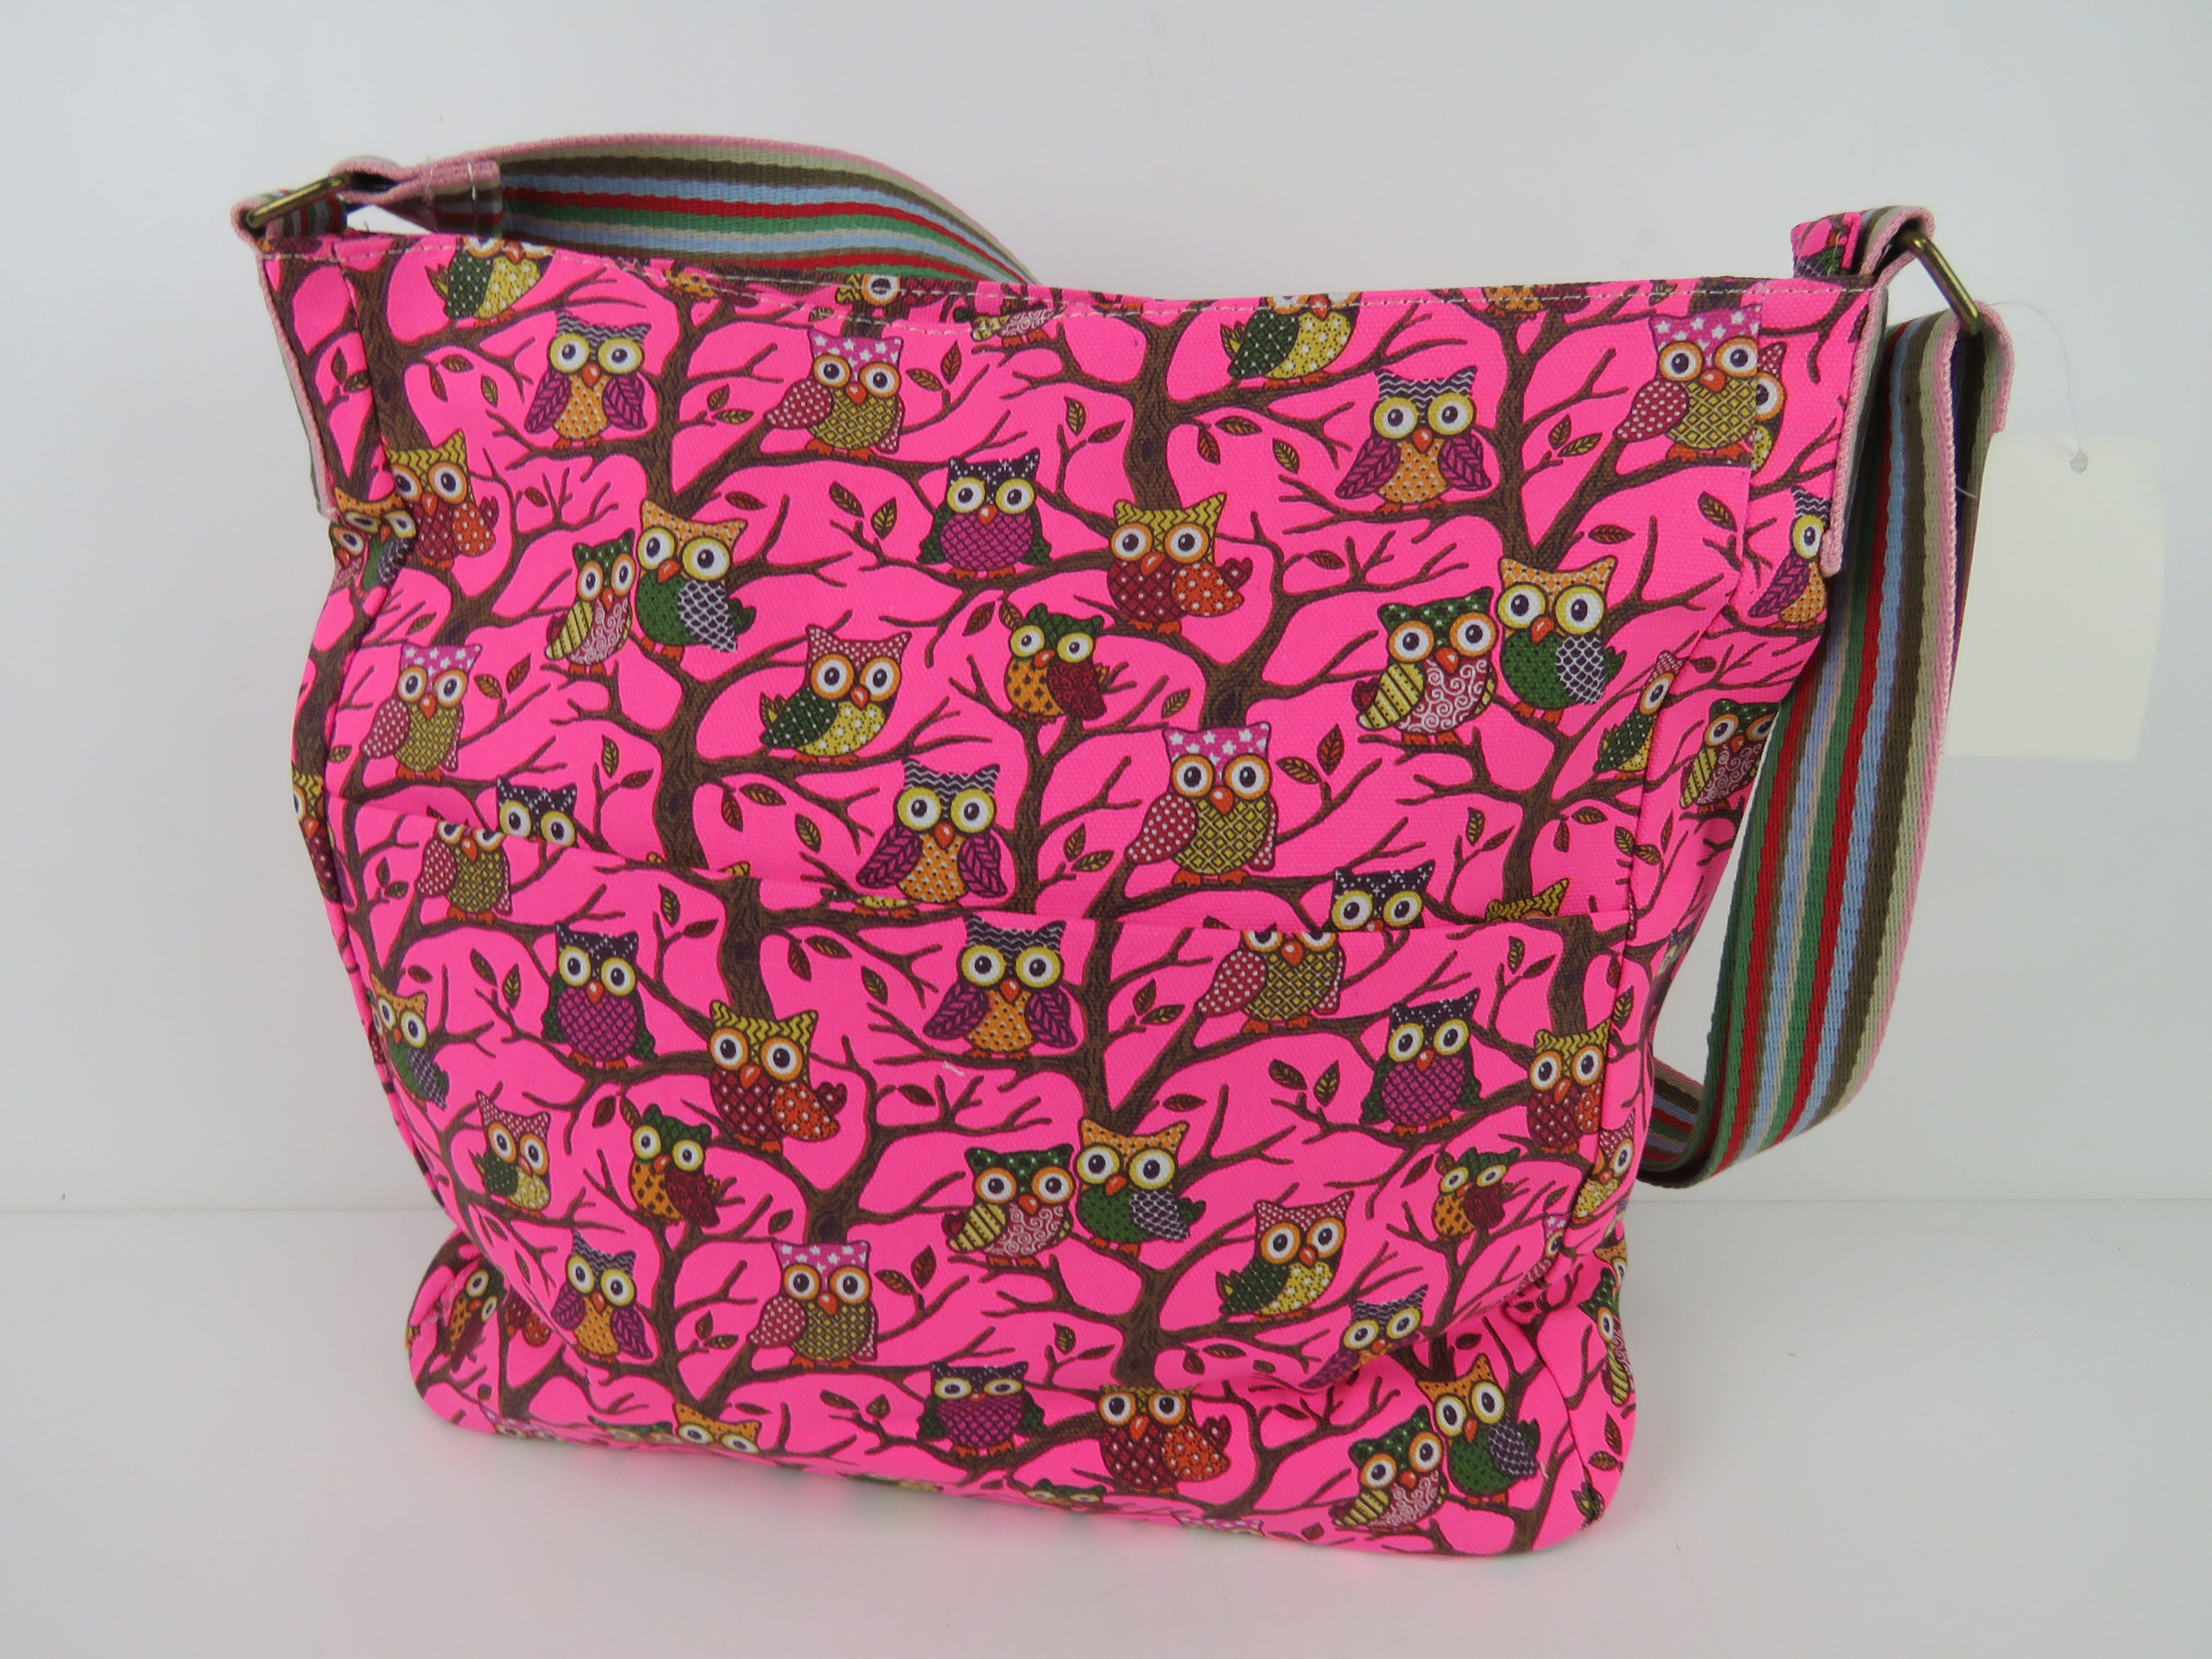 A fabric tote bag having owl pattern in